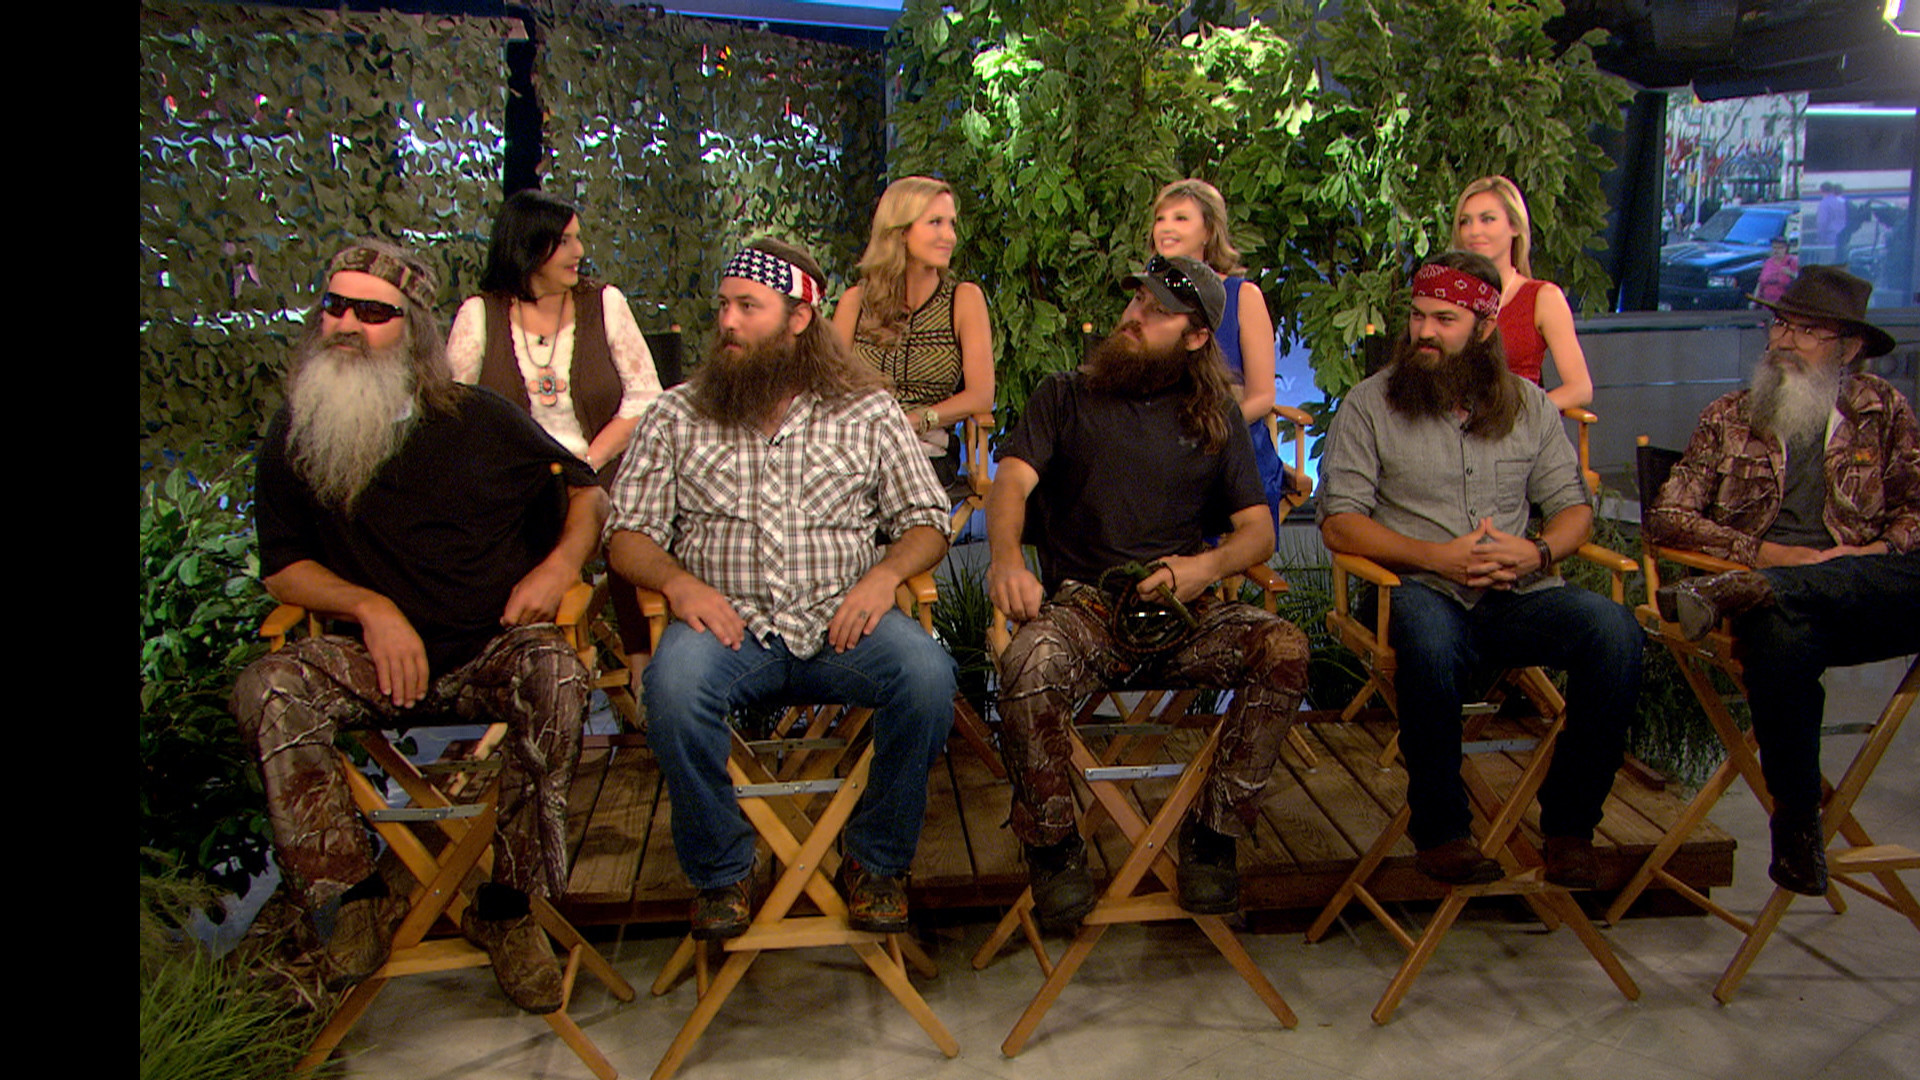 1920x1080 'Duck Dynasty' cast: We ad-lib most of the time - TODAY.com